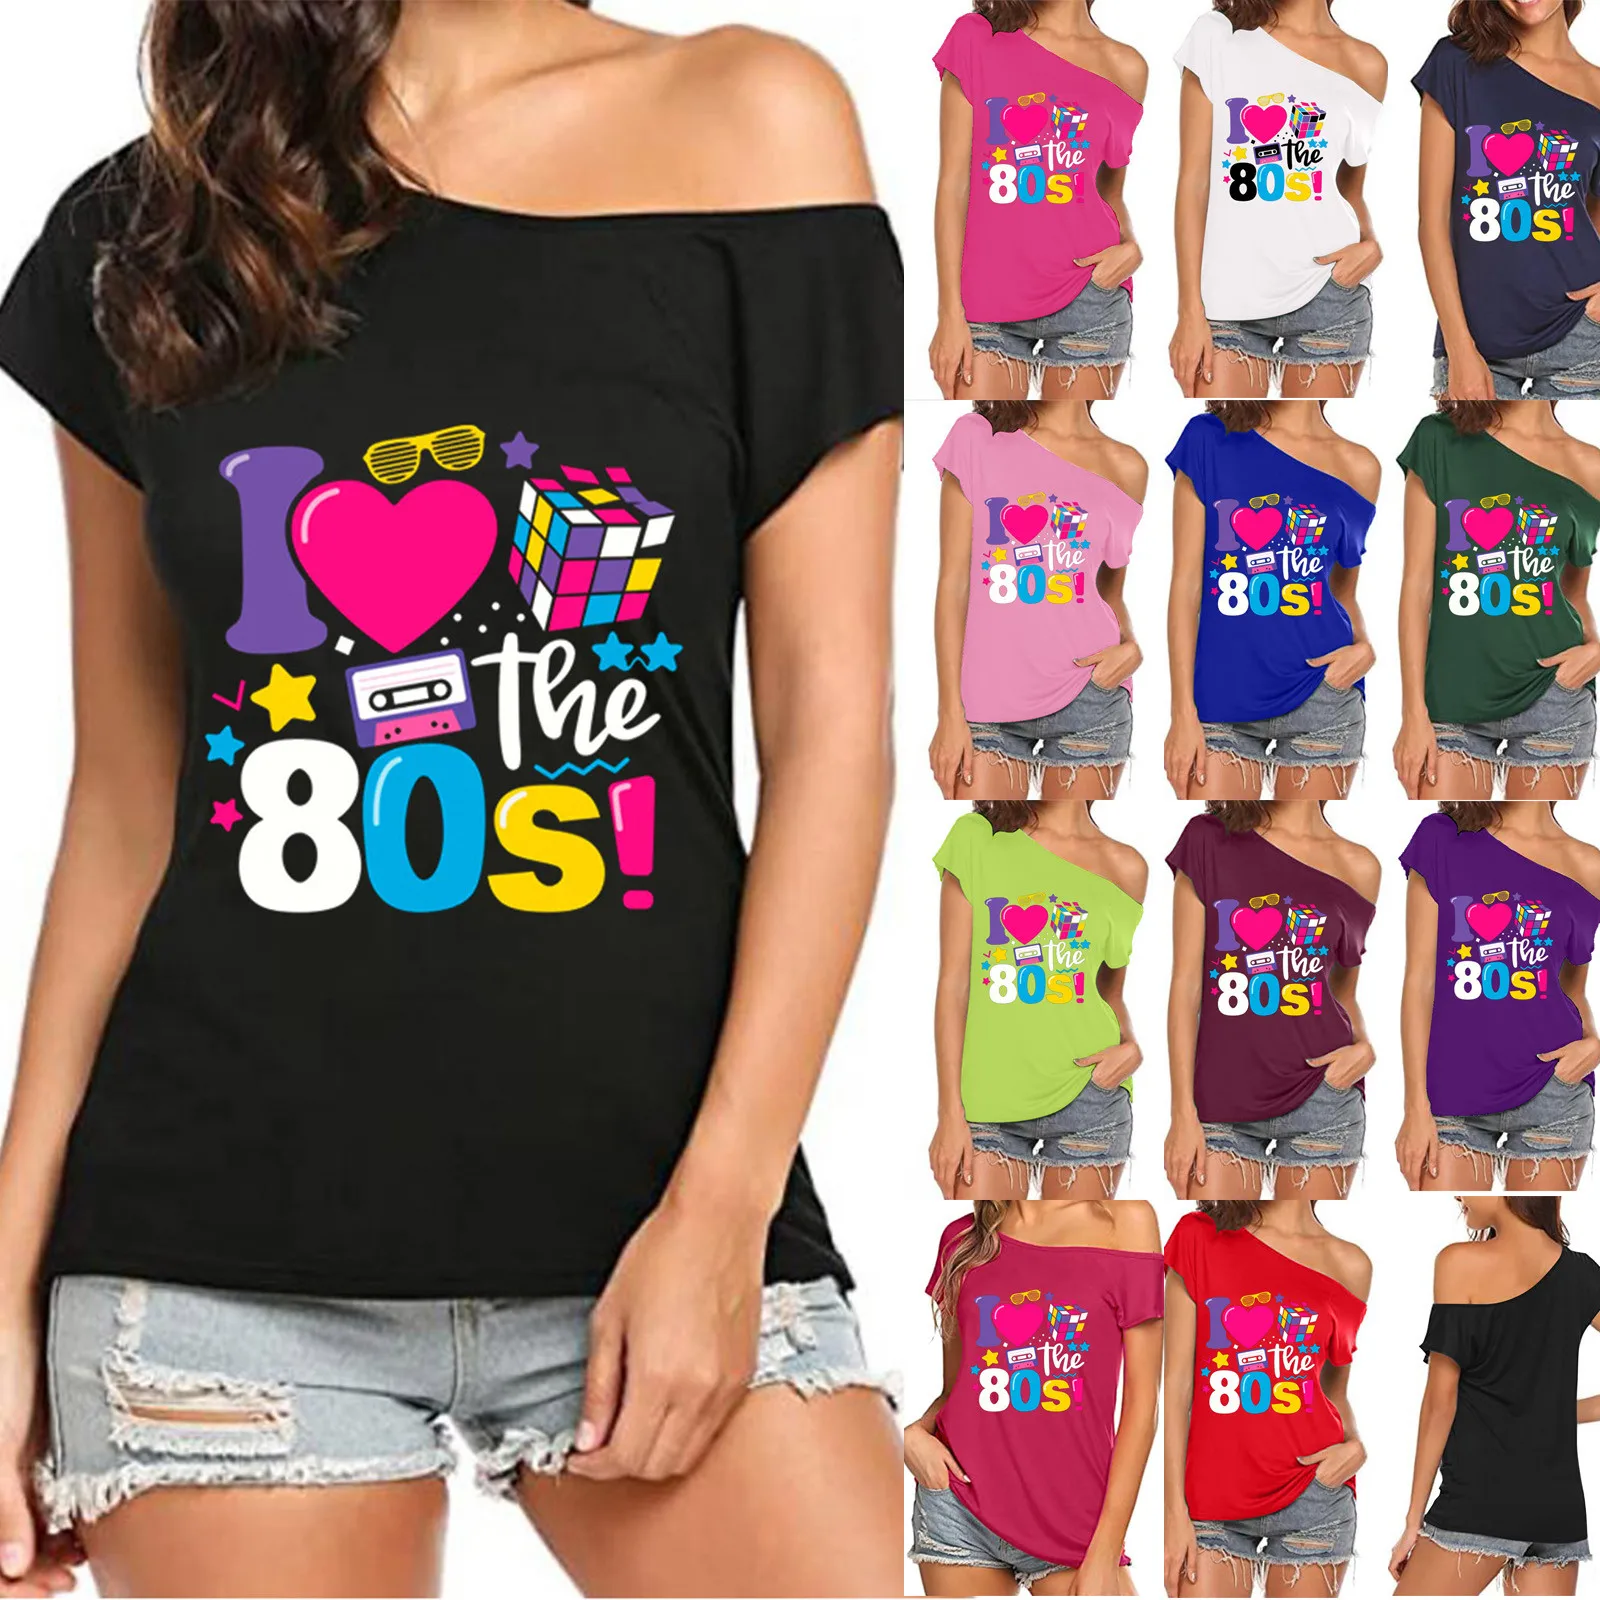 I Love The 80s Off The Shoulder Tops Female Summer Casual Short Sleeve Graphic Tees Streetwear Disco Costumes -Sfb936e13ce6f47f79049f26874f081e7c